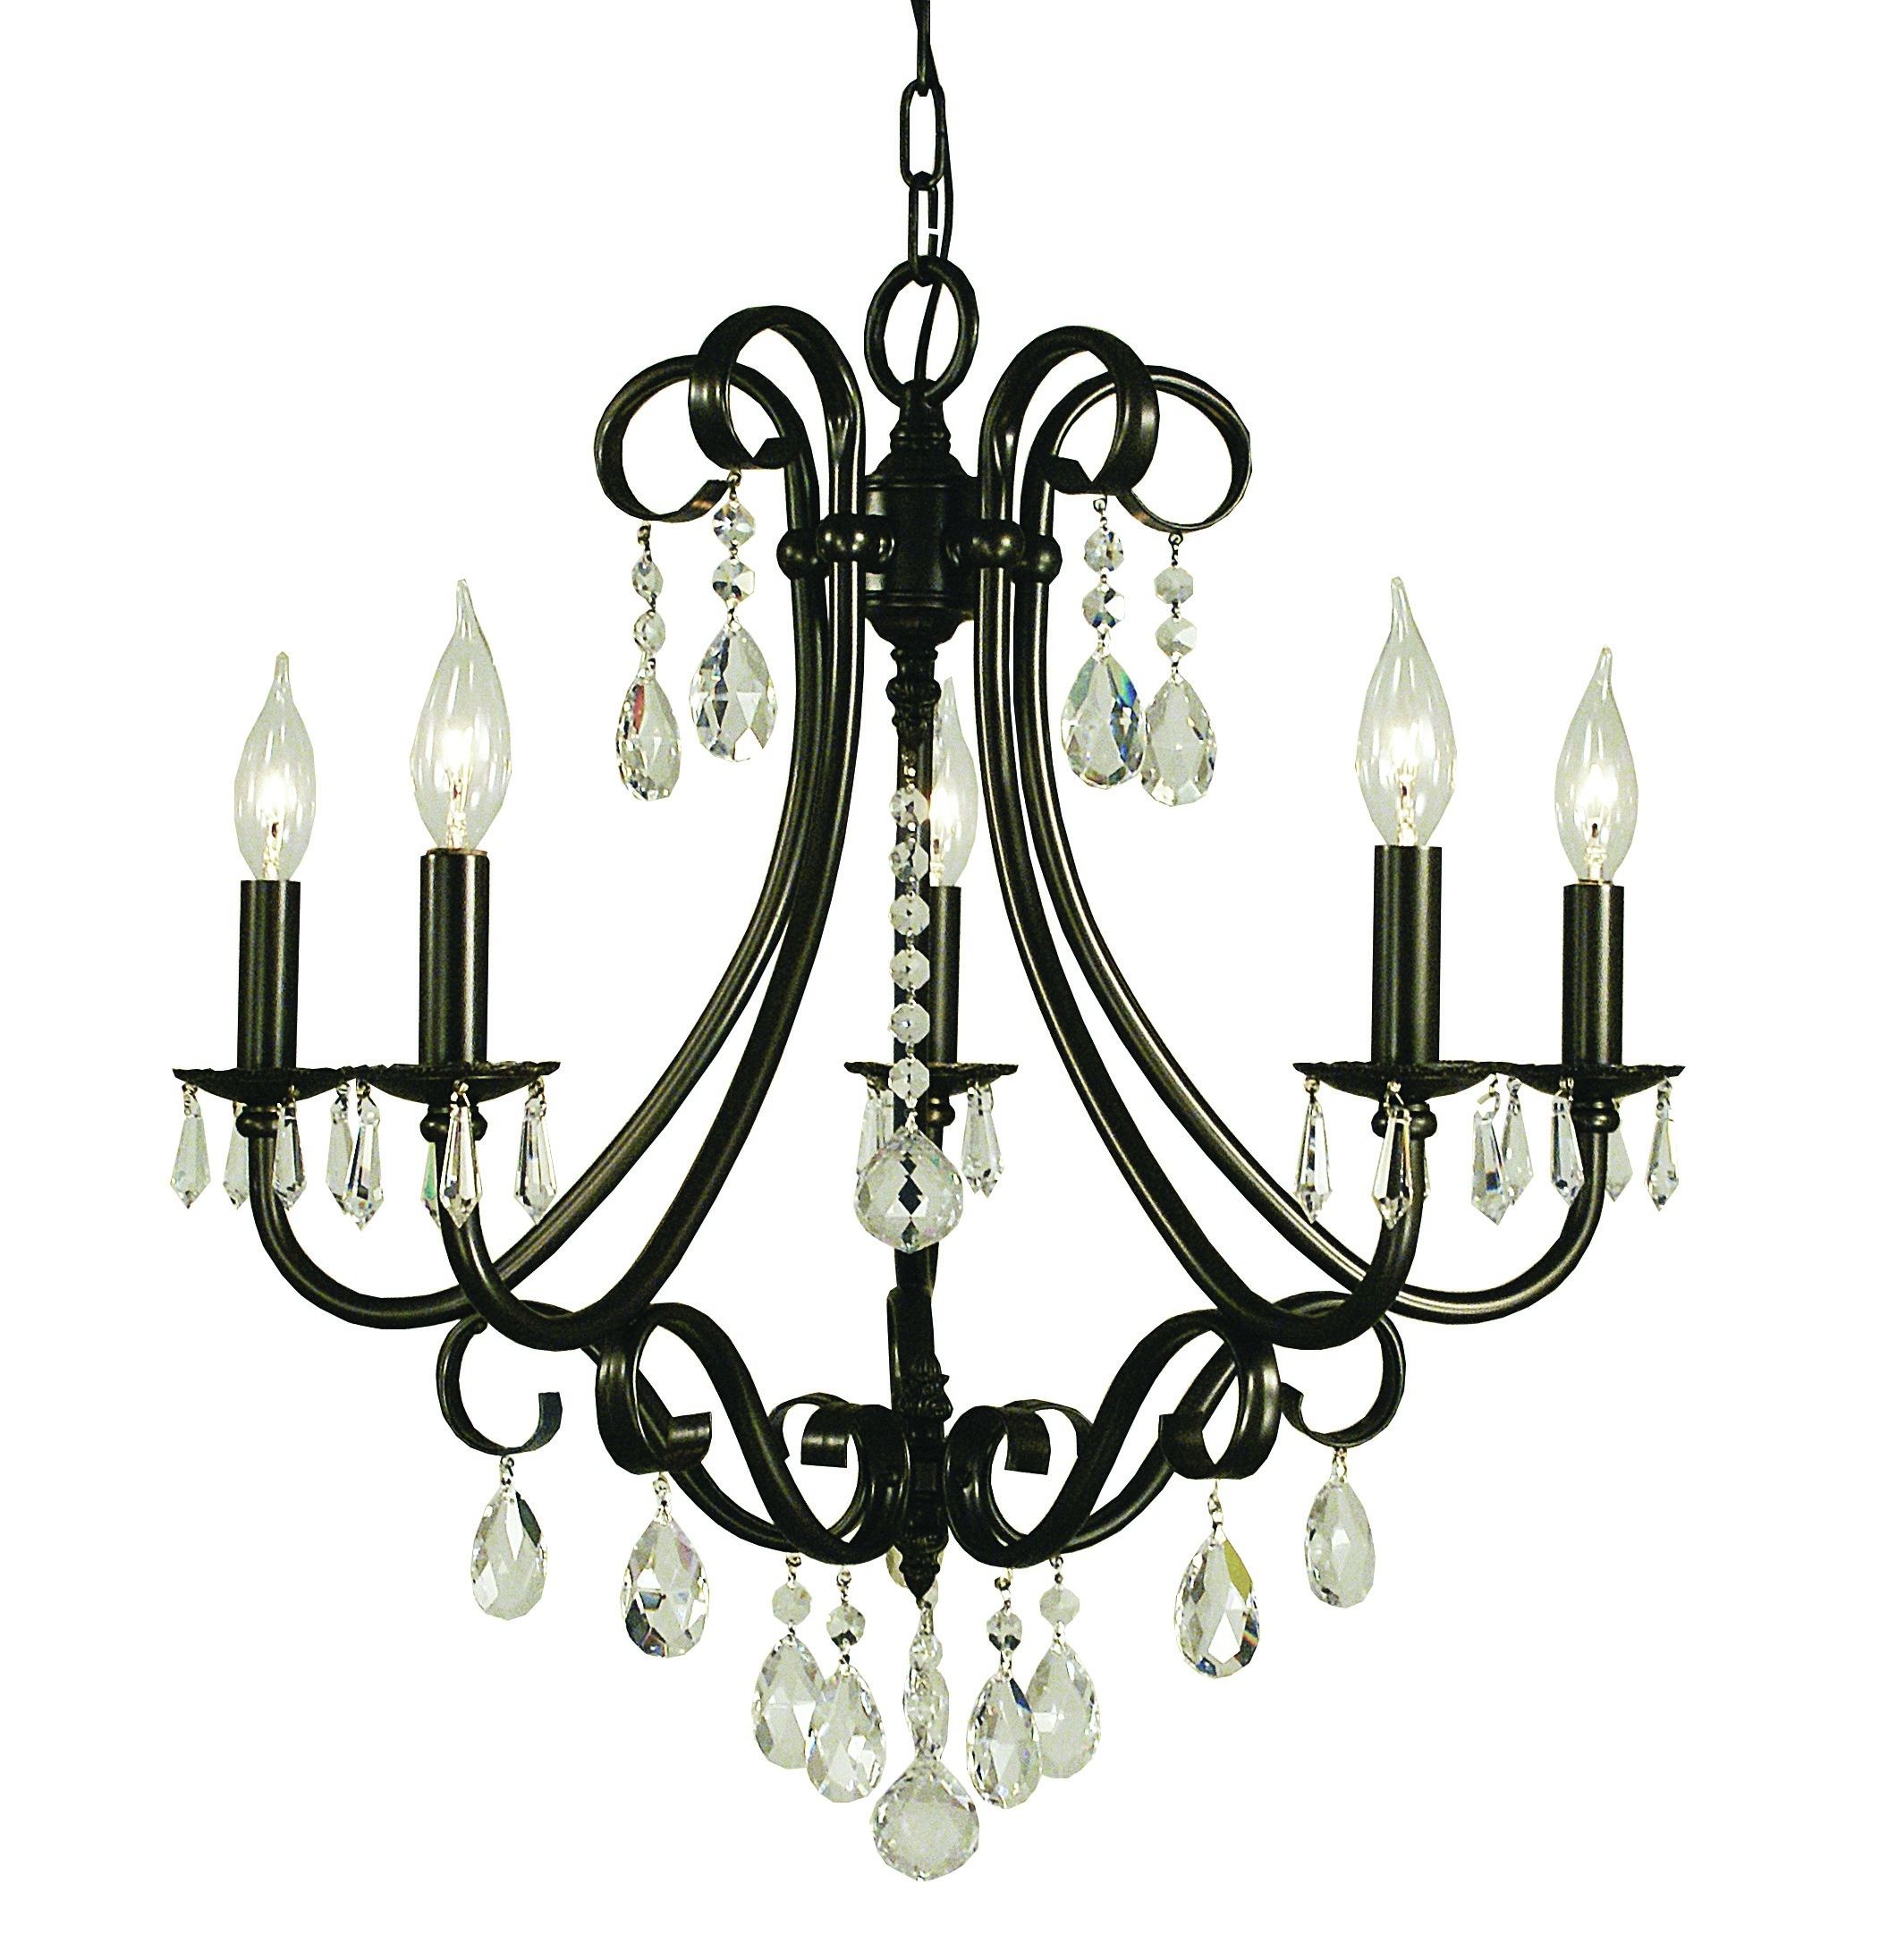 Choosing Chandeliers For A Traditional Kitchen In Traditional Chandeliers (View 2 of 12)